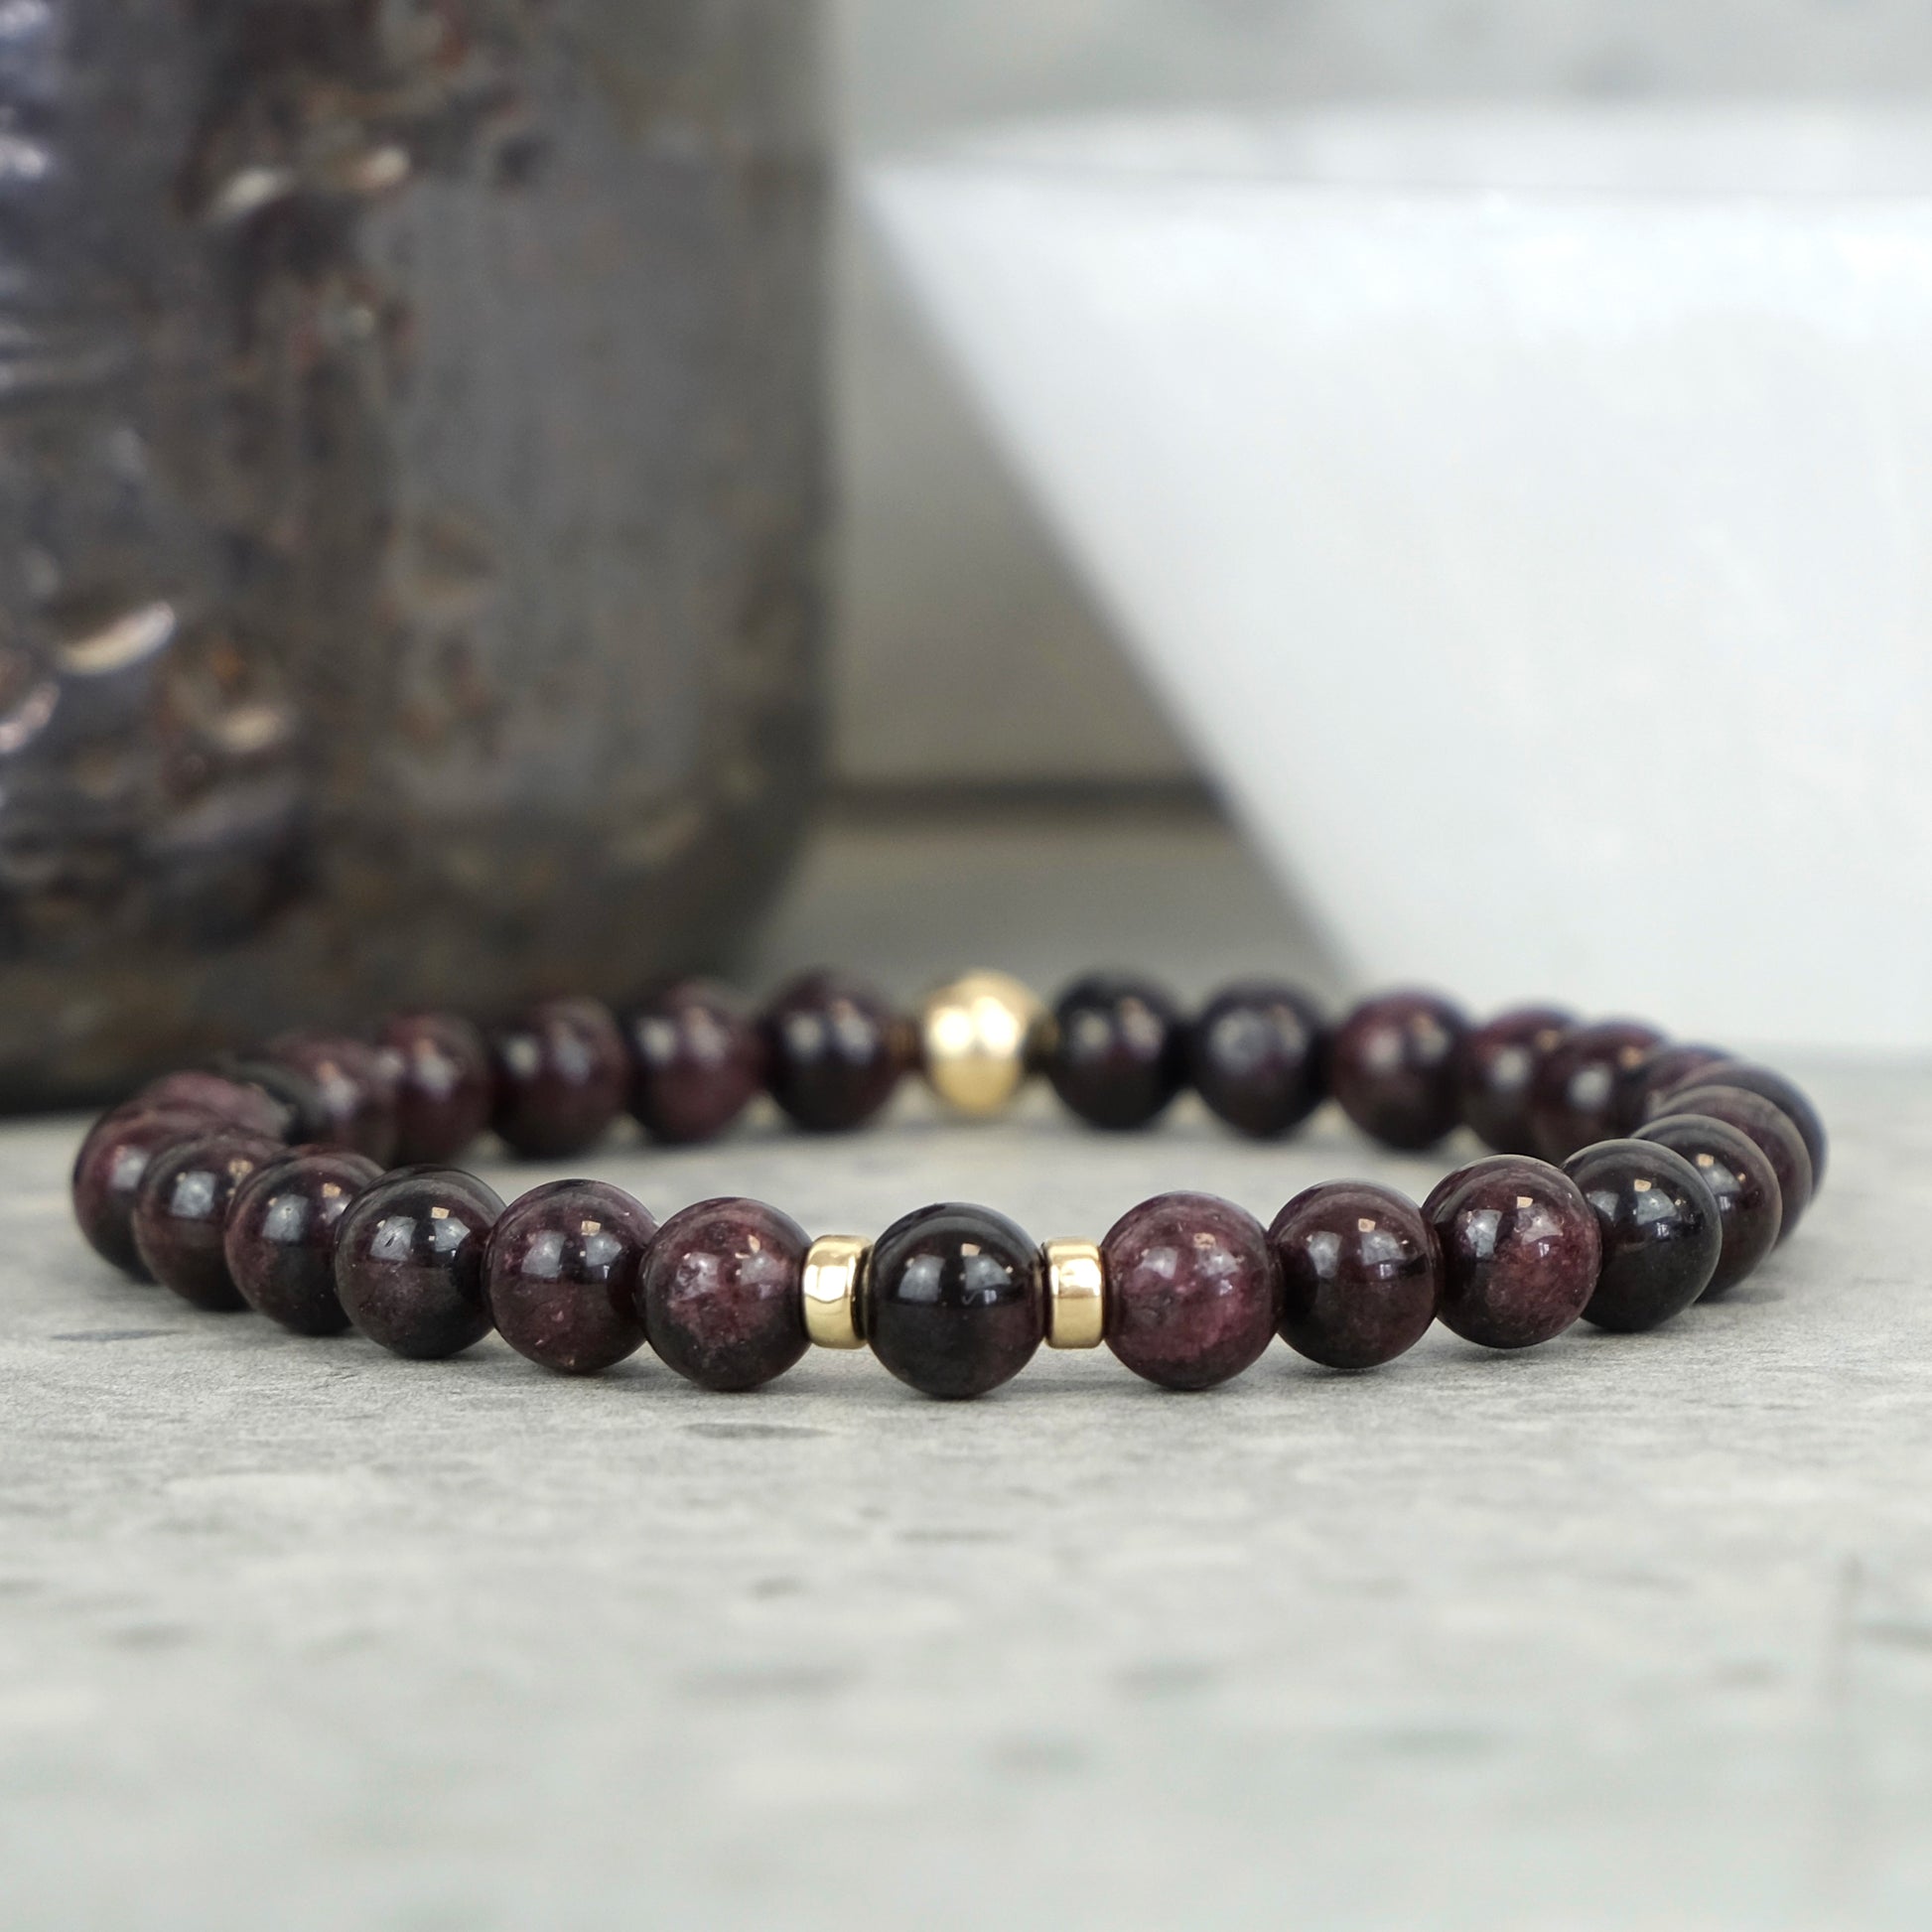 A garnet gemstone bracelet in 6mm beads with gold filled accessories